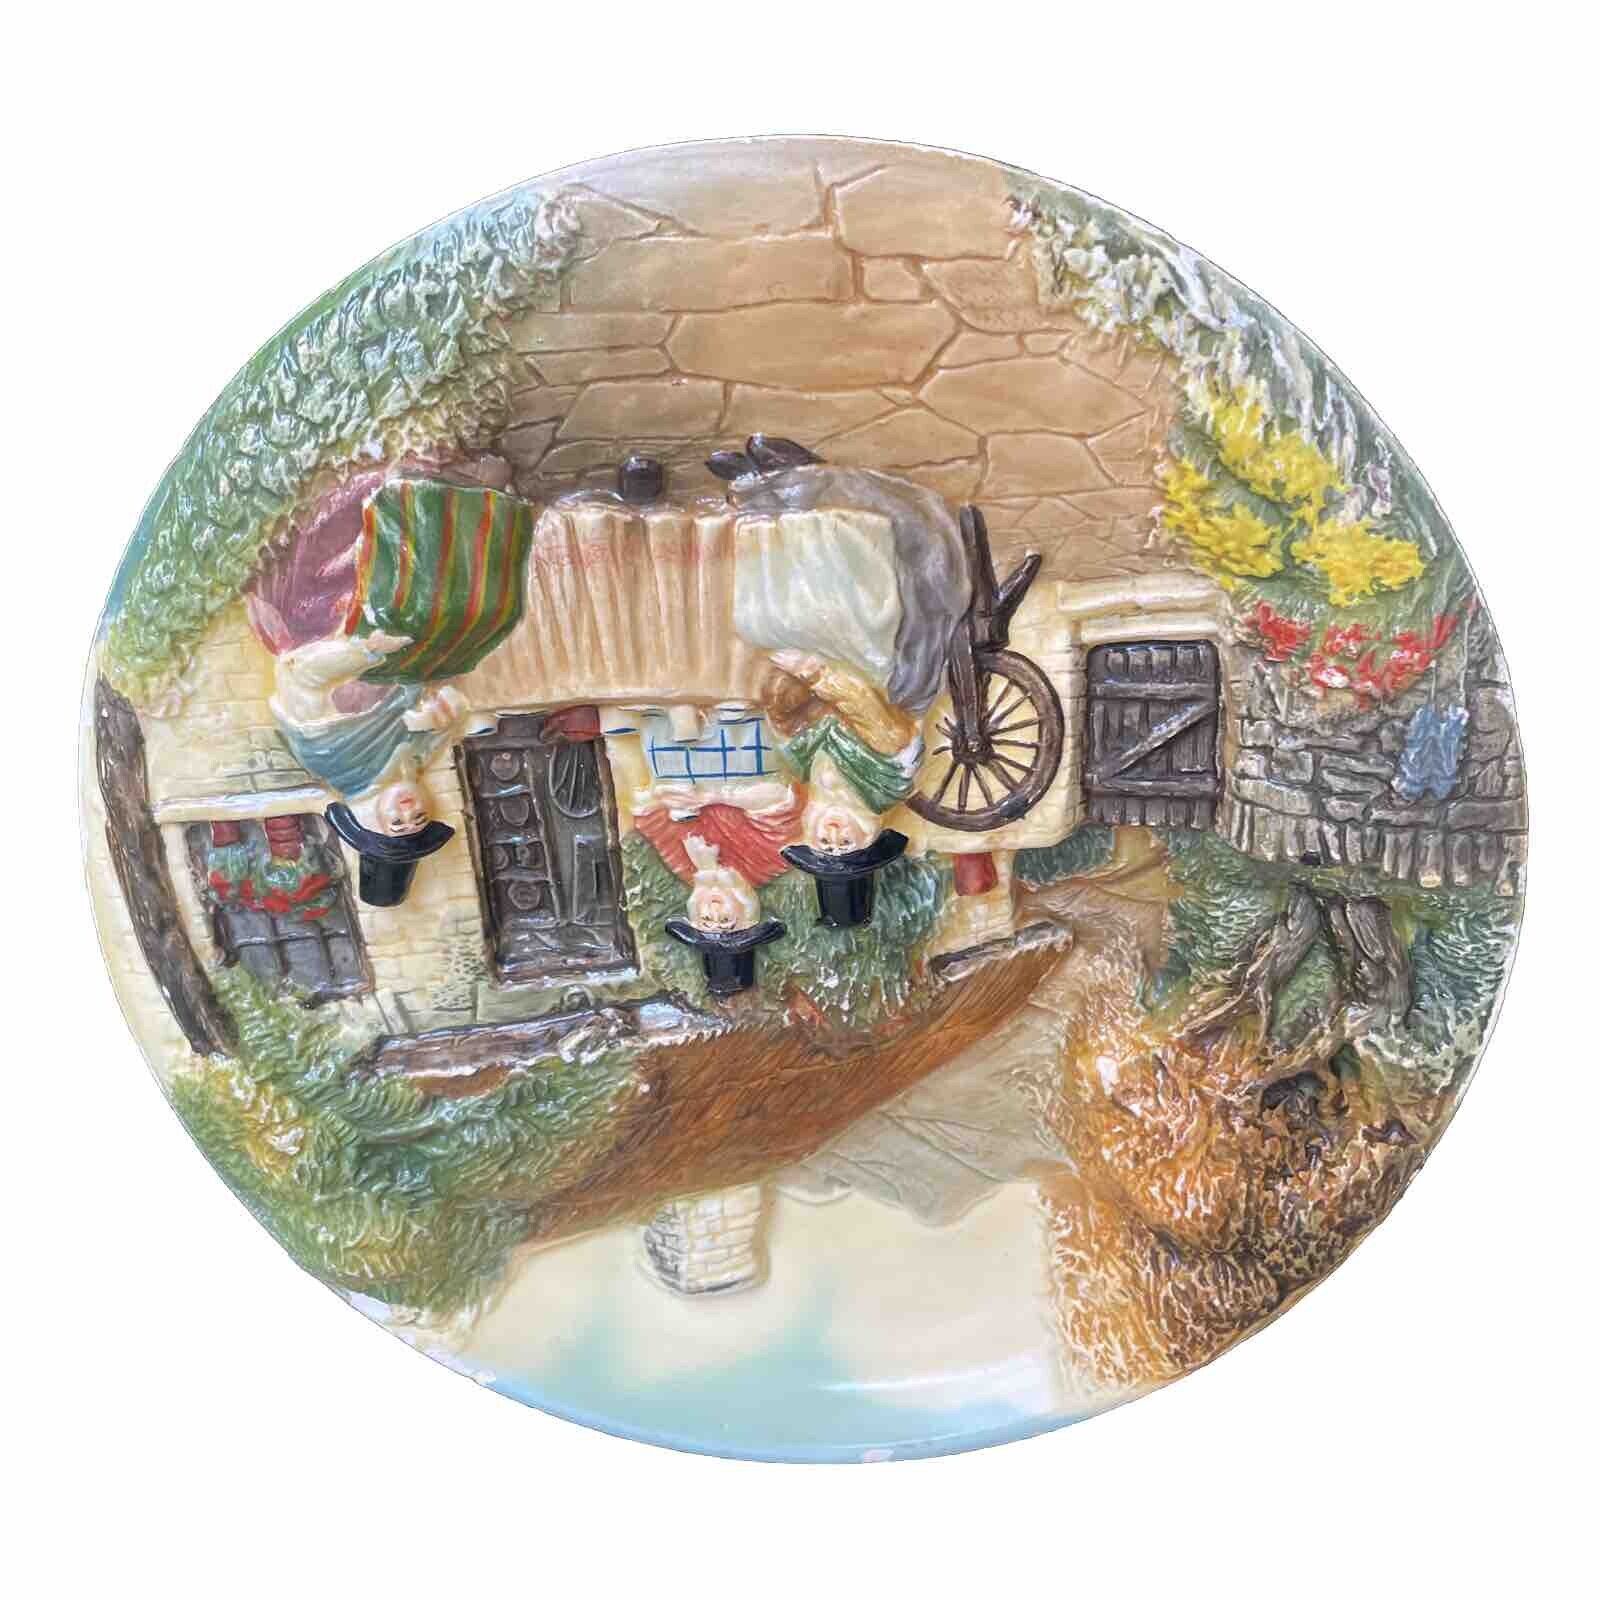 Handpainted Plaques by W. H. Bossons, Limited Edition. Made in Cheshire England